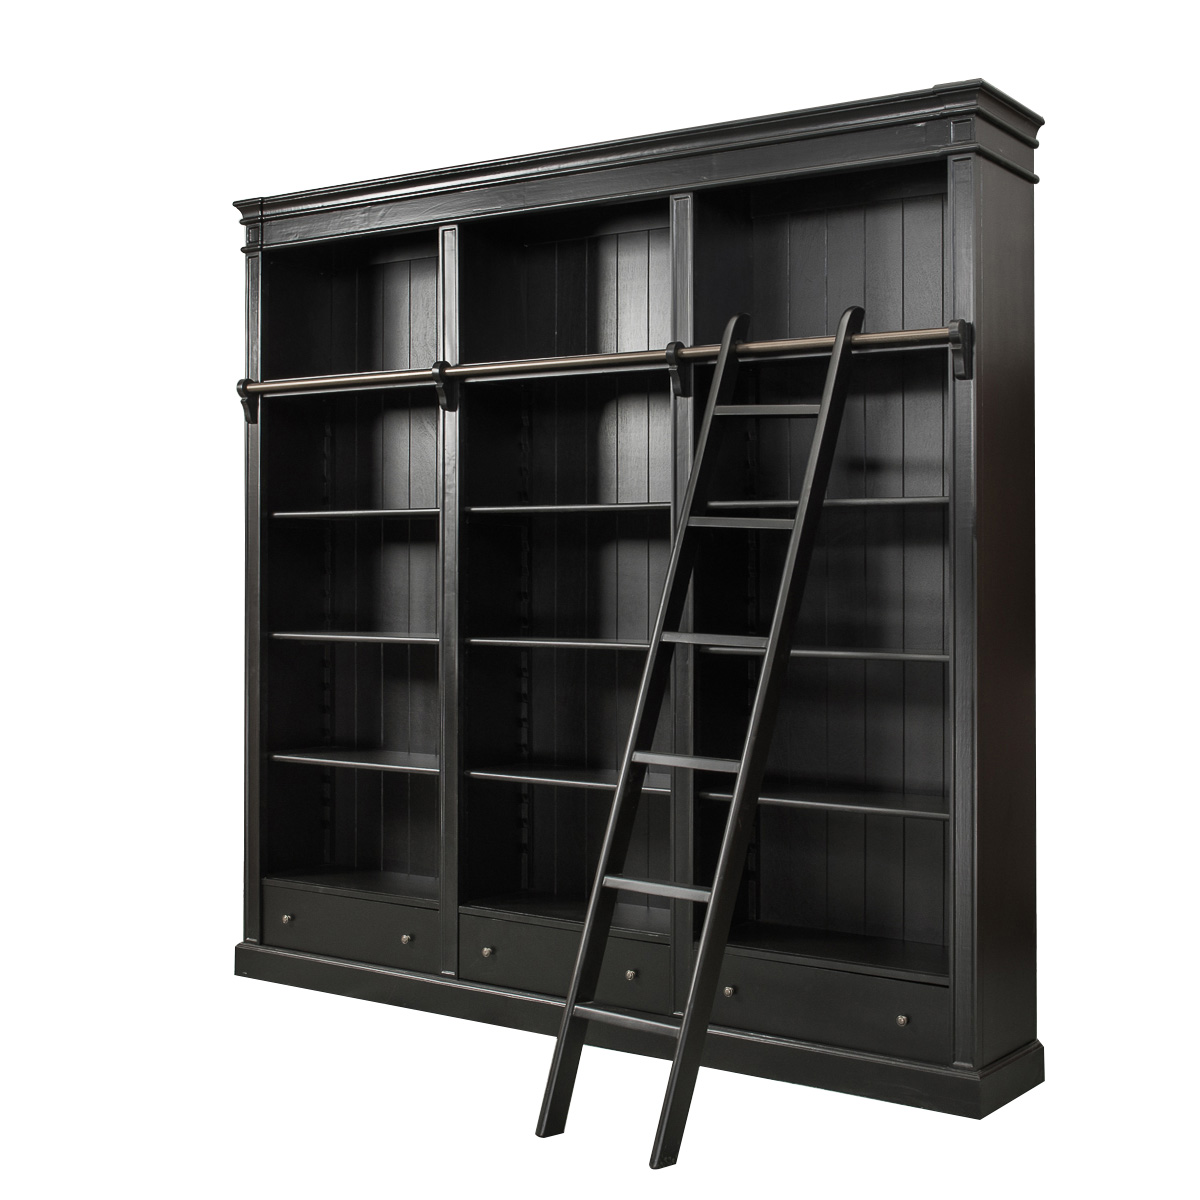 French Provincial Furniture Bookcase Bookshelves With Ladder Black